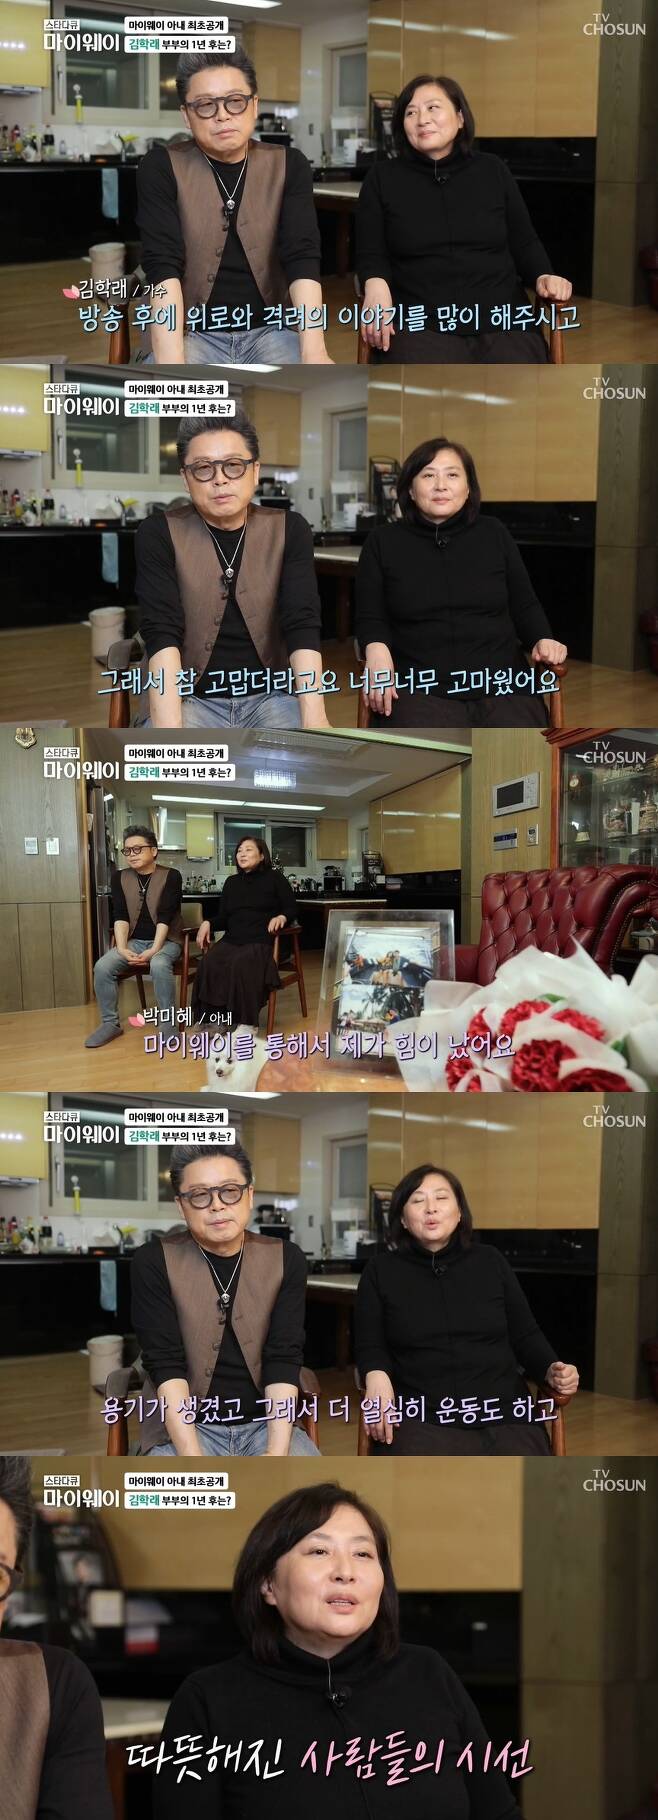 Seoul =) = Singer Kim Hak-rae and his wife Park Mi-hye explained Lee Seong-Mi For Keeps Scandal and said that their surroundings have changed their eyes.Park Mi-hye also said that he was suffering from incurable diseases for a long time.In the 276th episode of the TV Chosun current affairs culture program Star Documentary My Way (hereinafter referred to as My Way), which was broadcast on the 12th, singer Kim Hak-rae, who was the subject of the MBC College Song Festival, reappeared on the air in a year and five months and reported his current status.Kim Hak-rae said, I have been living with Miunderstock of many people because of silence for decades, I have heard a lot of bad sounds and have lived with my family. I have always been owed to my wife, I am sorry and sorry.His wife, Park Mi-hye, said she had been sick for seven years since she fell down. She had been suffering from incurable disease, Pained.Pained posterior group is an incurable disease that causes Pained, fatigue, sleep disturbance, and cognitive impairment in many parts of the body without finding a specific cause.Kim Hak-rae said, If this person is sick, the weather is mentally dark even if the sunlight shines. If I want to be better, this person should be healthy.I started from the loudness before my marriage, and I think that the surrounding gaze, Miunderstood and criticism, and these things have been a big shock, he said. As the depression burst, the symptoms of Pained, a post-fibrosis disease, He said.Pained is sick even if he winds, he said of his wifes condition. So if you do not wear long sleeves, it is difficult to go out in the summer.Kim Hak-rae, Park Mi-hye and his wife also reported the reaction around the change since the appearance of My Way last year.Kim Hak-rae said, After the broadcast, I told you a lot of stories of comfort and encouragement, and when I go out on the street, I greet you more than before. I heard a lot of stories like this, He said.Park Mi-hye said, I was strong, I had courage, so I had to work harder and live harder, and I thought I should get better. I was able to see people with my head.He also said, Many people have been Misunderstood and have spoken a lot of criticism, but in that part, the way you look at Misunderstood has changed, and I thank you.Kim Hak-rae also said, It is true that more Misunderstood than before has been released and the atmosphere has improved.Kim Hak-rae appeared on My Way last July and explained the long-running rumor.Kim Hak-rae was rumored to have escaped in the late 1980s when he learned of Lee Seong-Mis pregnancy, and later met his wife, Park Mi-hye, and chose to immigrate to Germany.Kim said that he had a deep relationship with Lee Seong-Mi at the time, but he did not make a marriage promise, and he was informed of his pregnancy three months after his separation.My Way production team said, I think when and when Misunderstood met you, and Park Mi-hye said, I received a lot of Misunderstood, but it was Misunderstood. Because then my husband was alone (without a private person) and met me without anything happening.Kim Hak-rae also explained why he was silent.He said, I can not say, so I am silent. To tell you briefly, it is the child who was born without sin that the problem in the relationship of adults was most damaged.Kim Hak-rae said, If I went out to the music industry and became a singer, everything would continue to be talked about, and my children would go to elementary school at a young age and talk about it while going to kindergarten. I thought. 